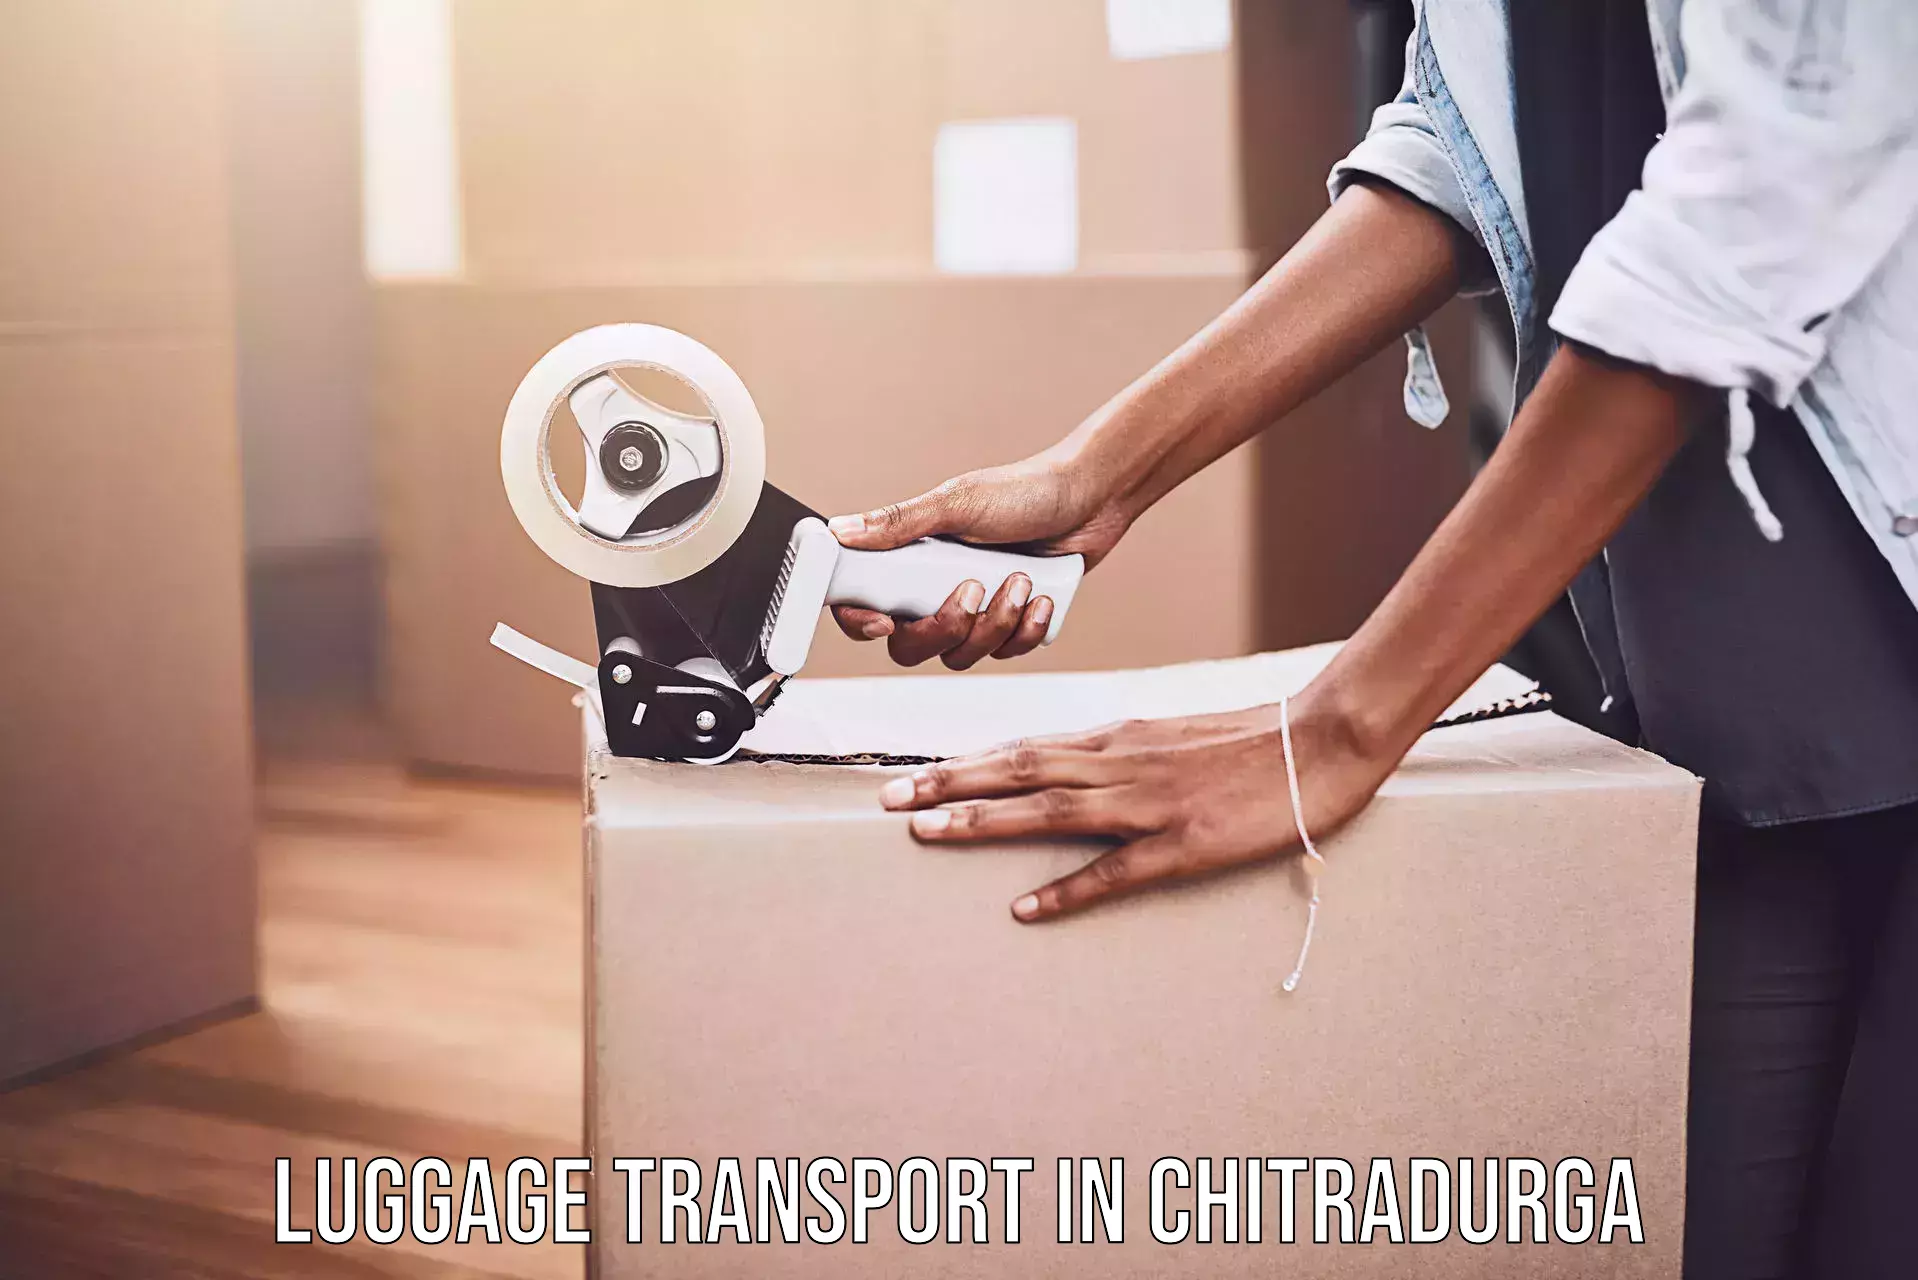 Luggage delivery system in Chitradurga